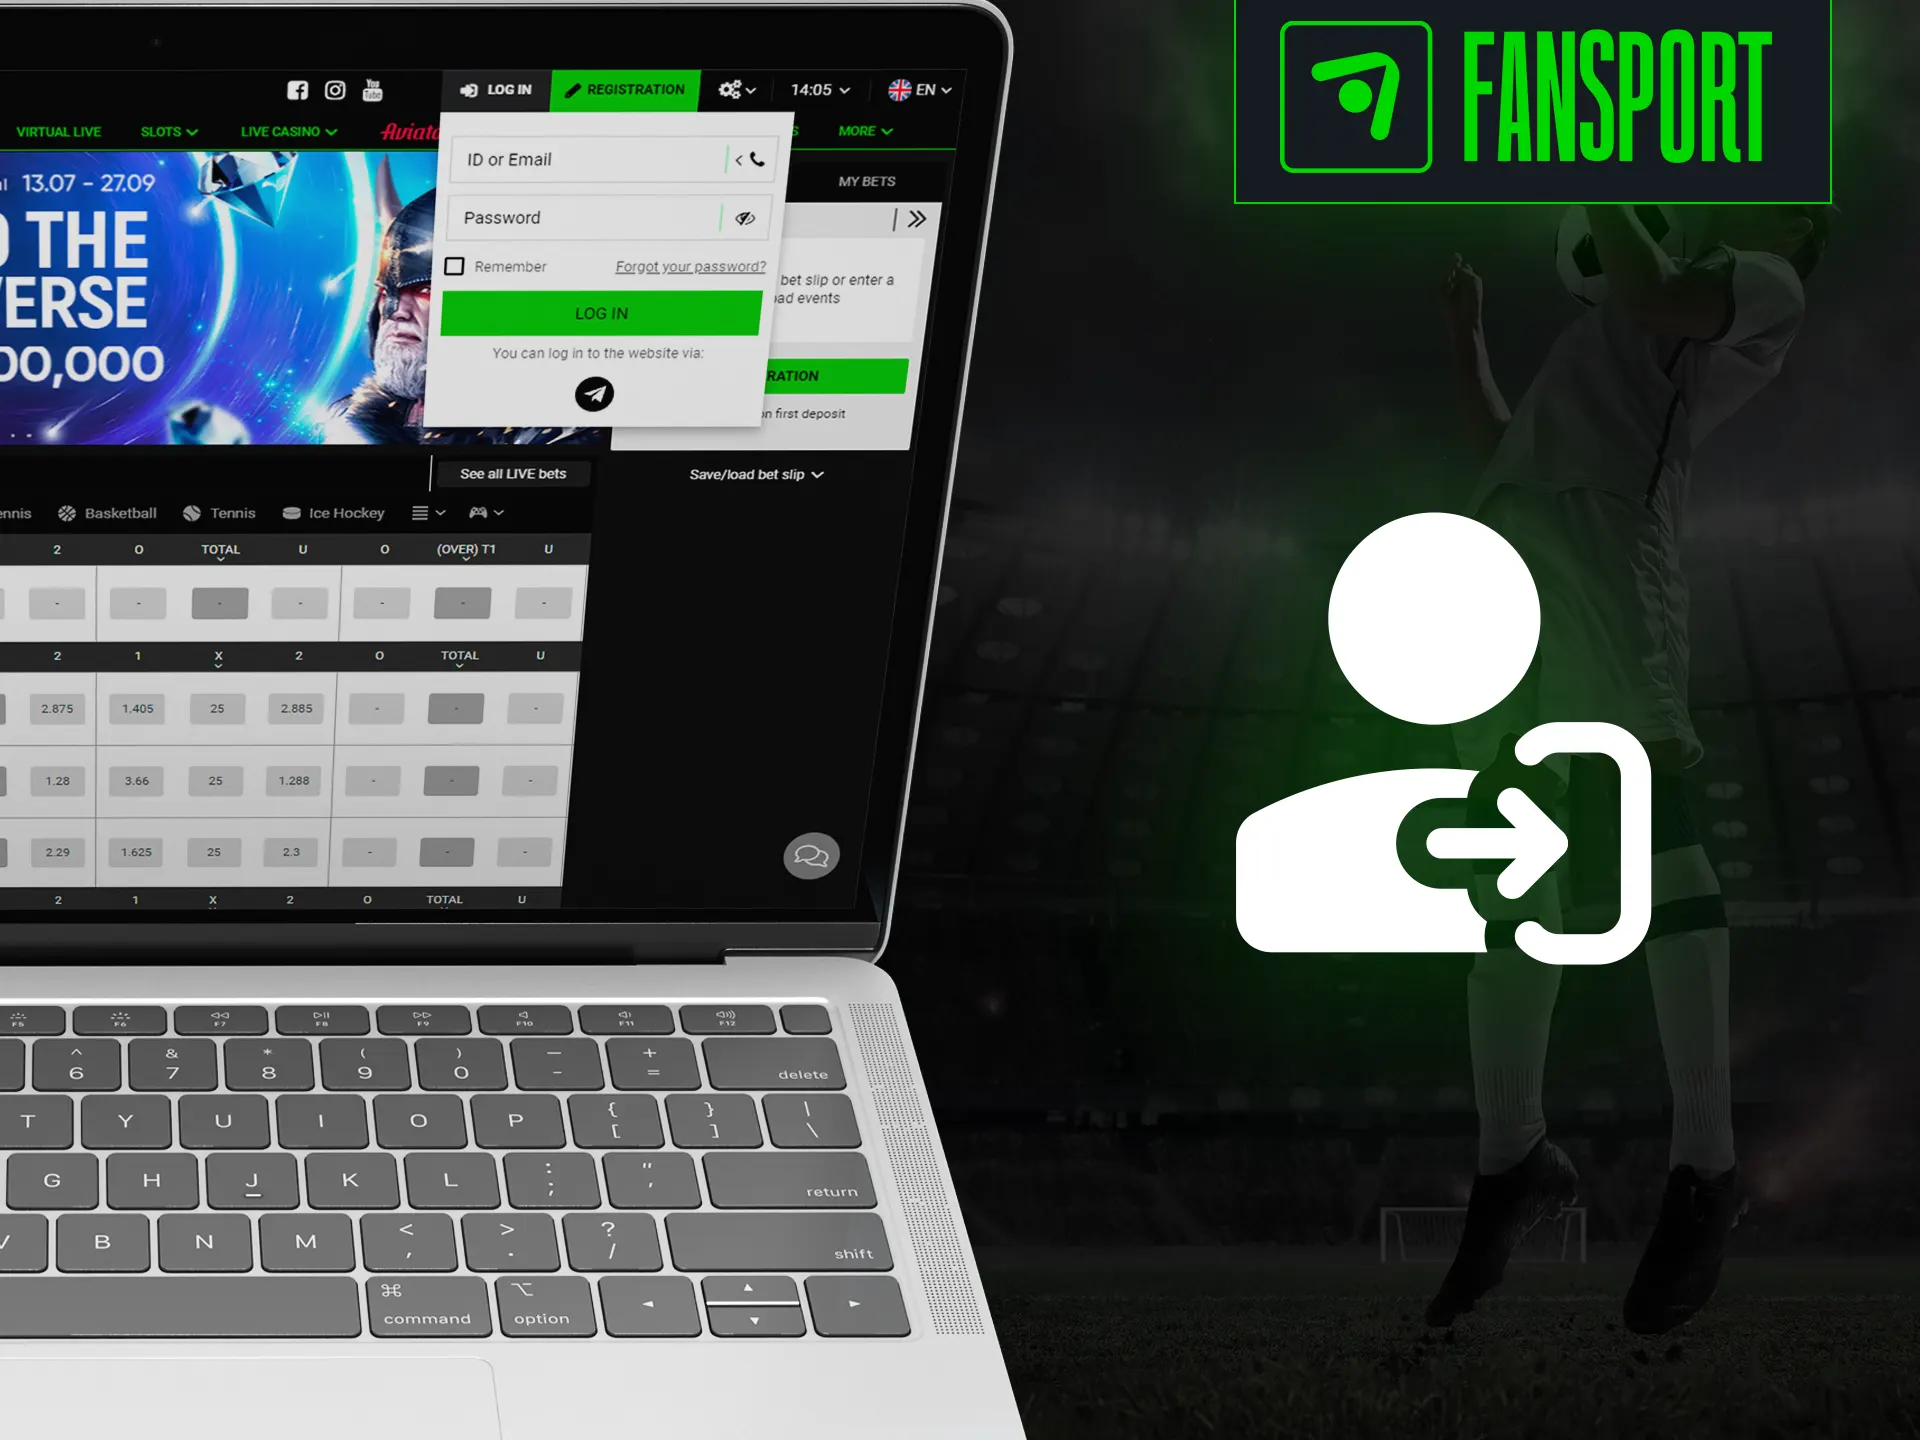 You can use either a personal computer or a mobile device to access your Fansport account.